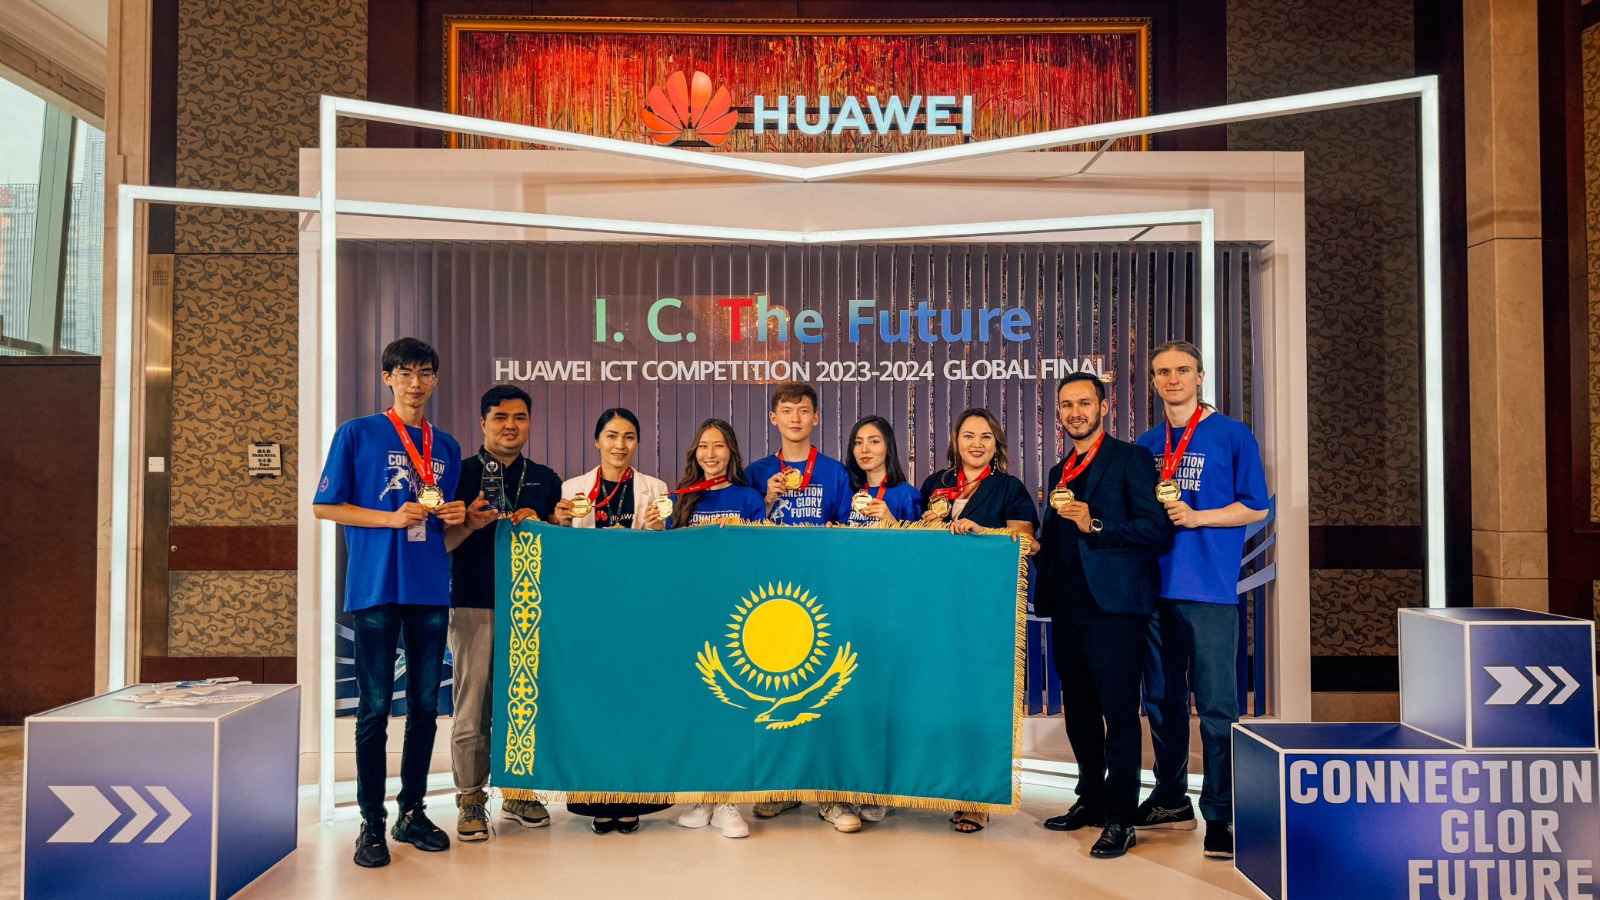 KazNU students are the best in the Huawei ICT Competition